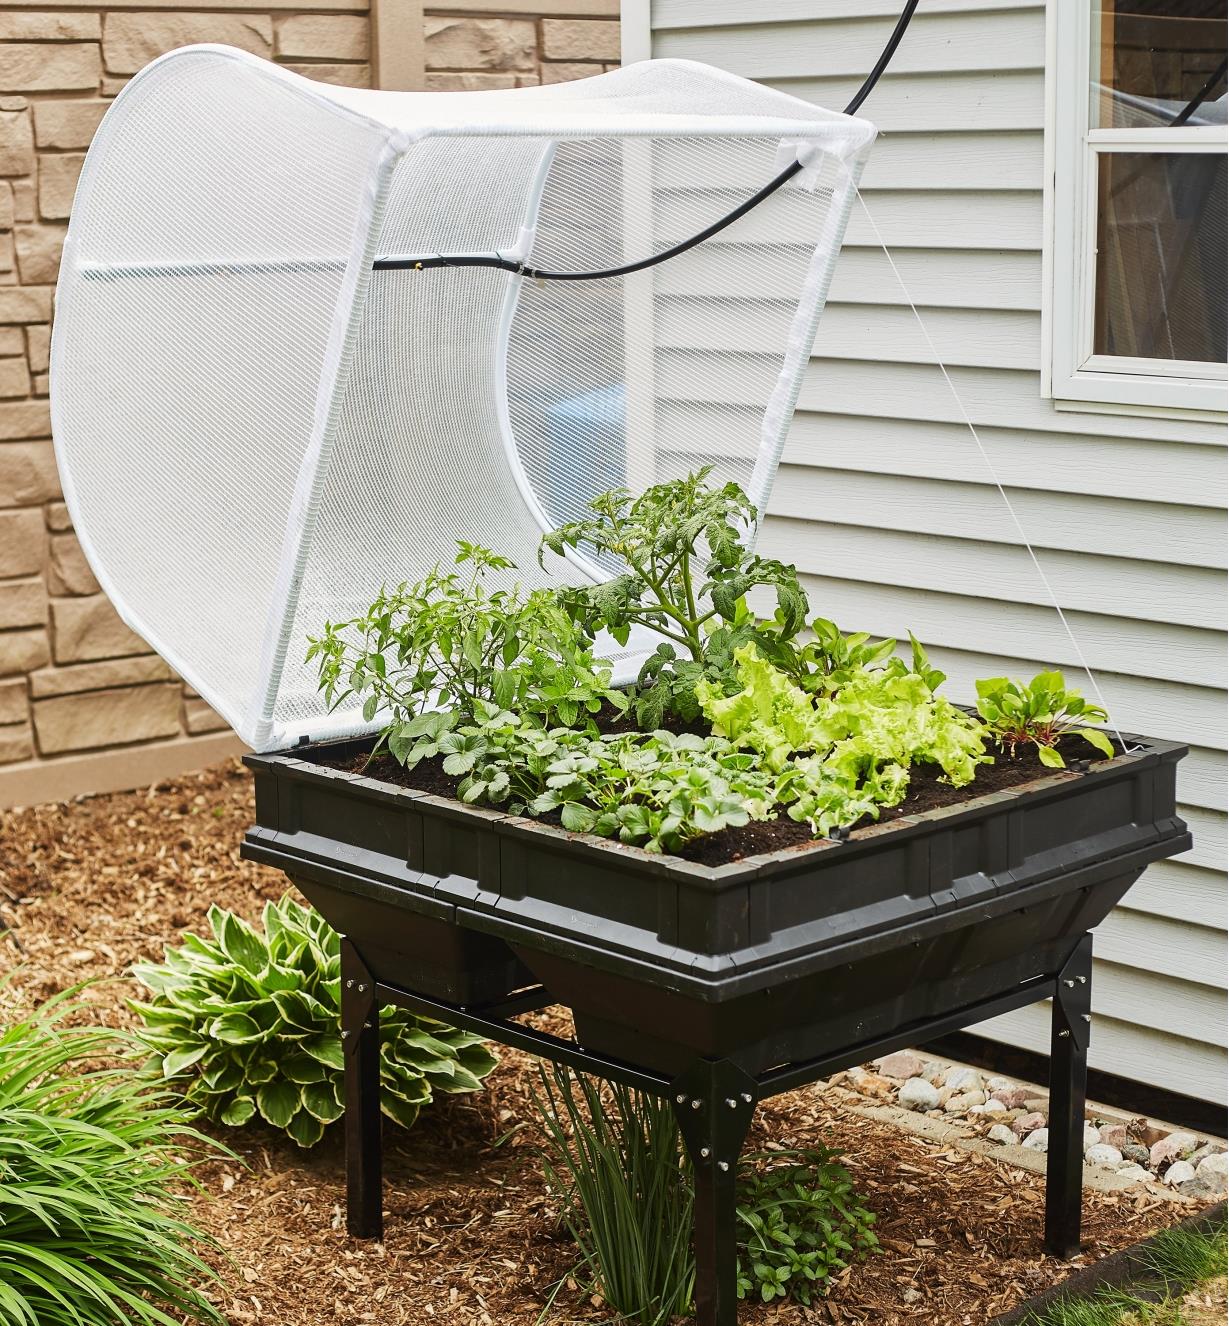 A Vegepod container garden with a base and the cover open sits in a garden